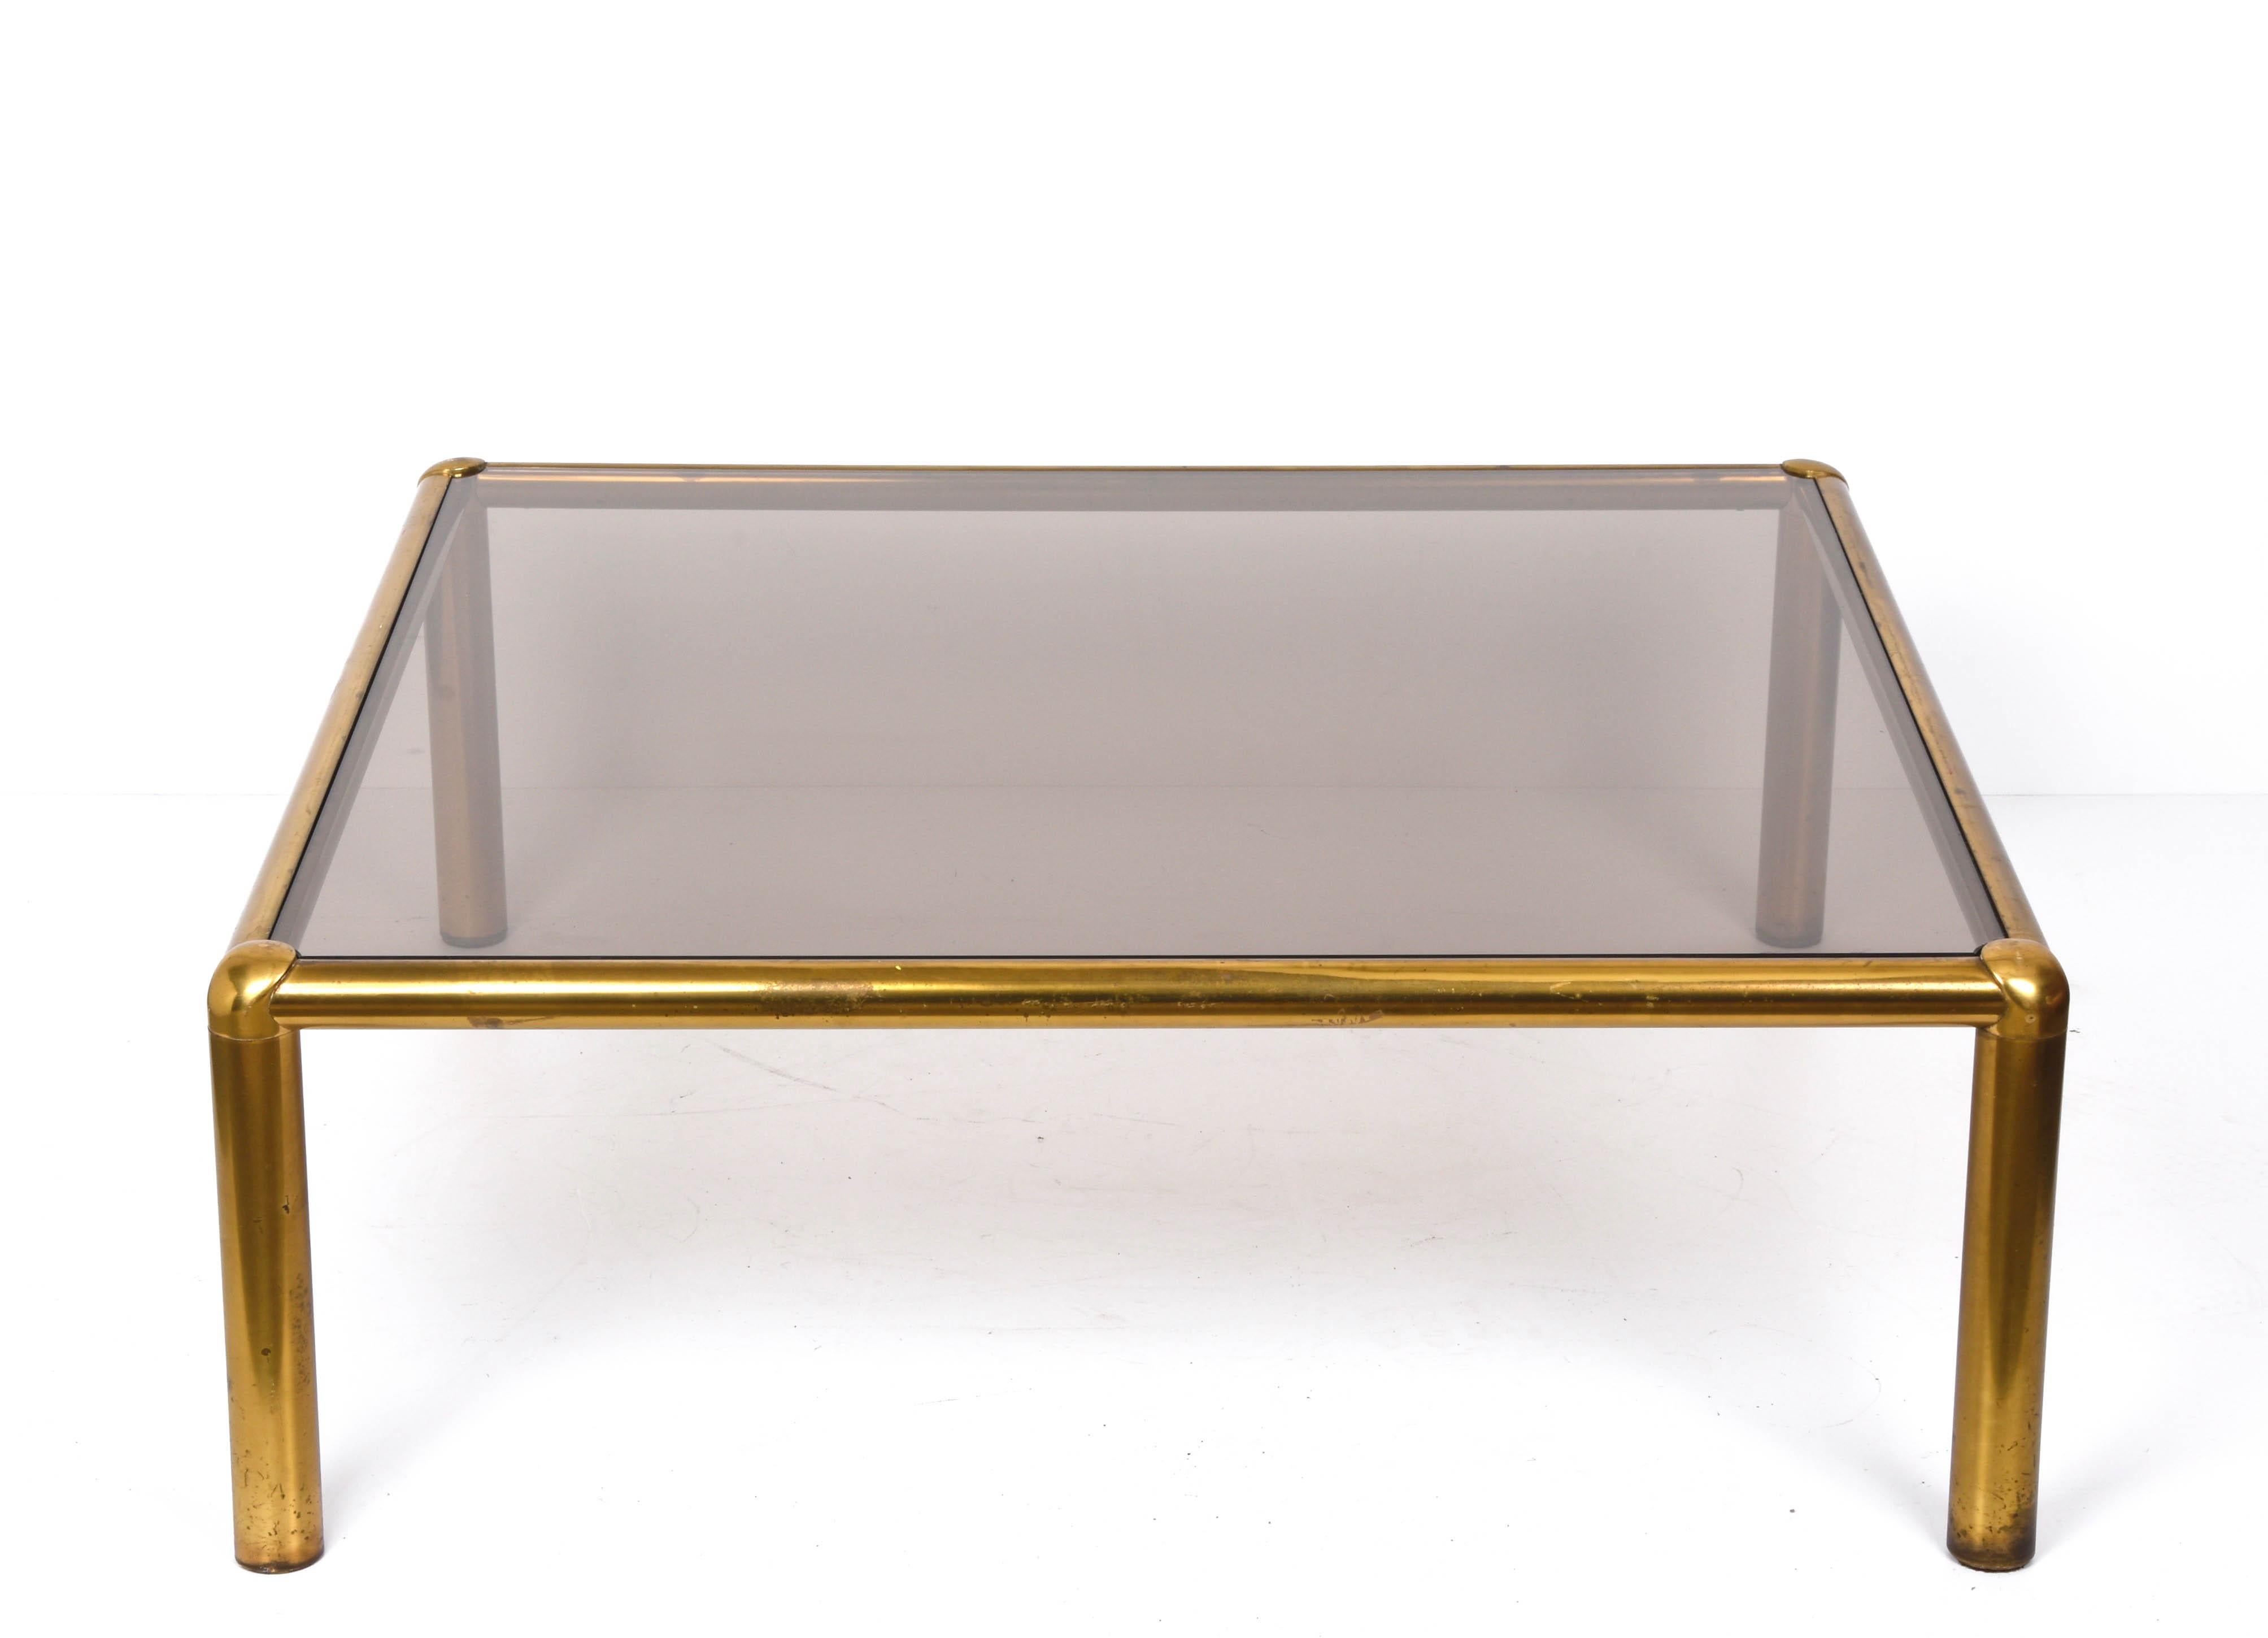 Amazing golden brass and smoked glass squared coffee table. This fantastic piece was designed in Italy during the 1980s.

This fantastic item has a wonderful top of smoked glass with delightful lines and a great material mix.

This item has some